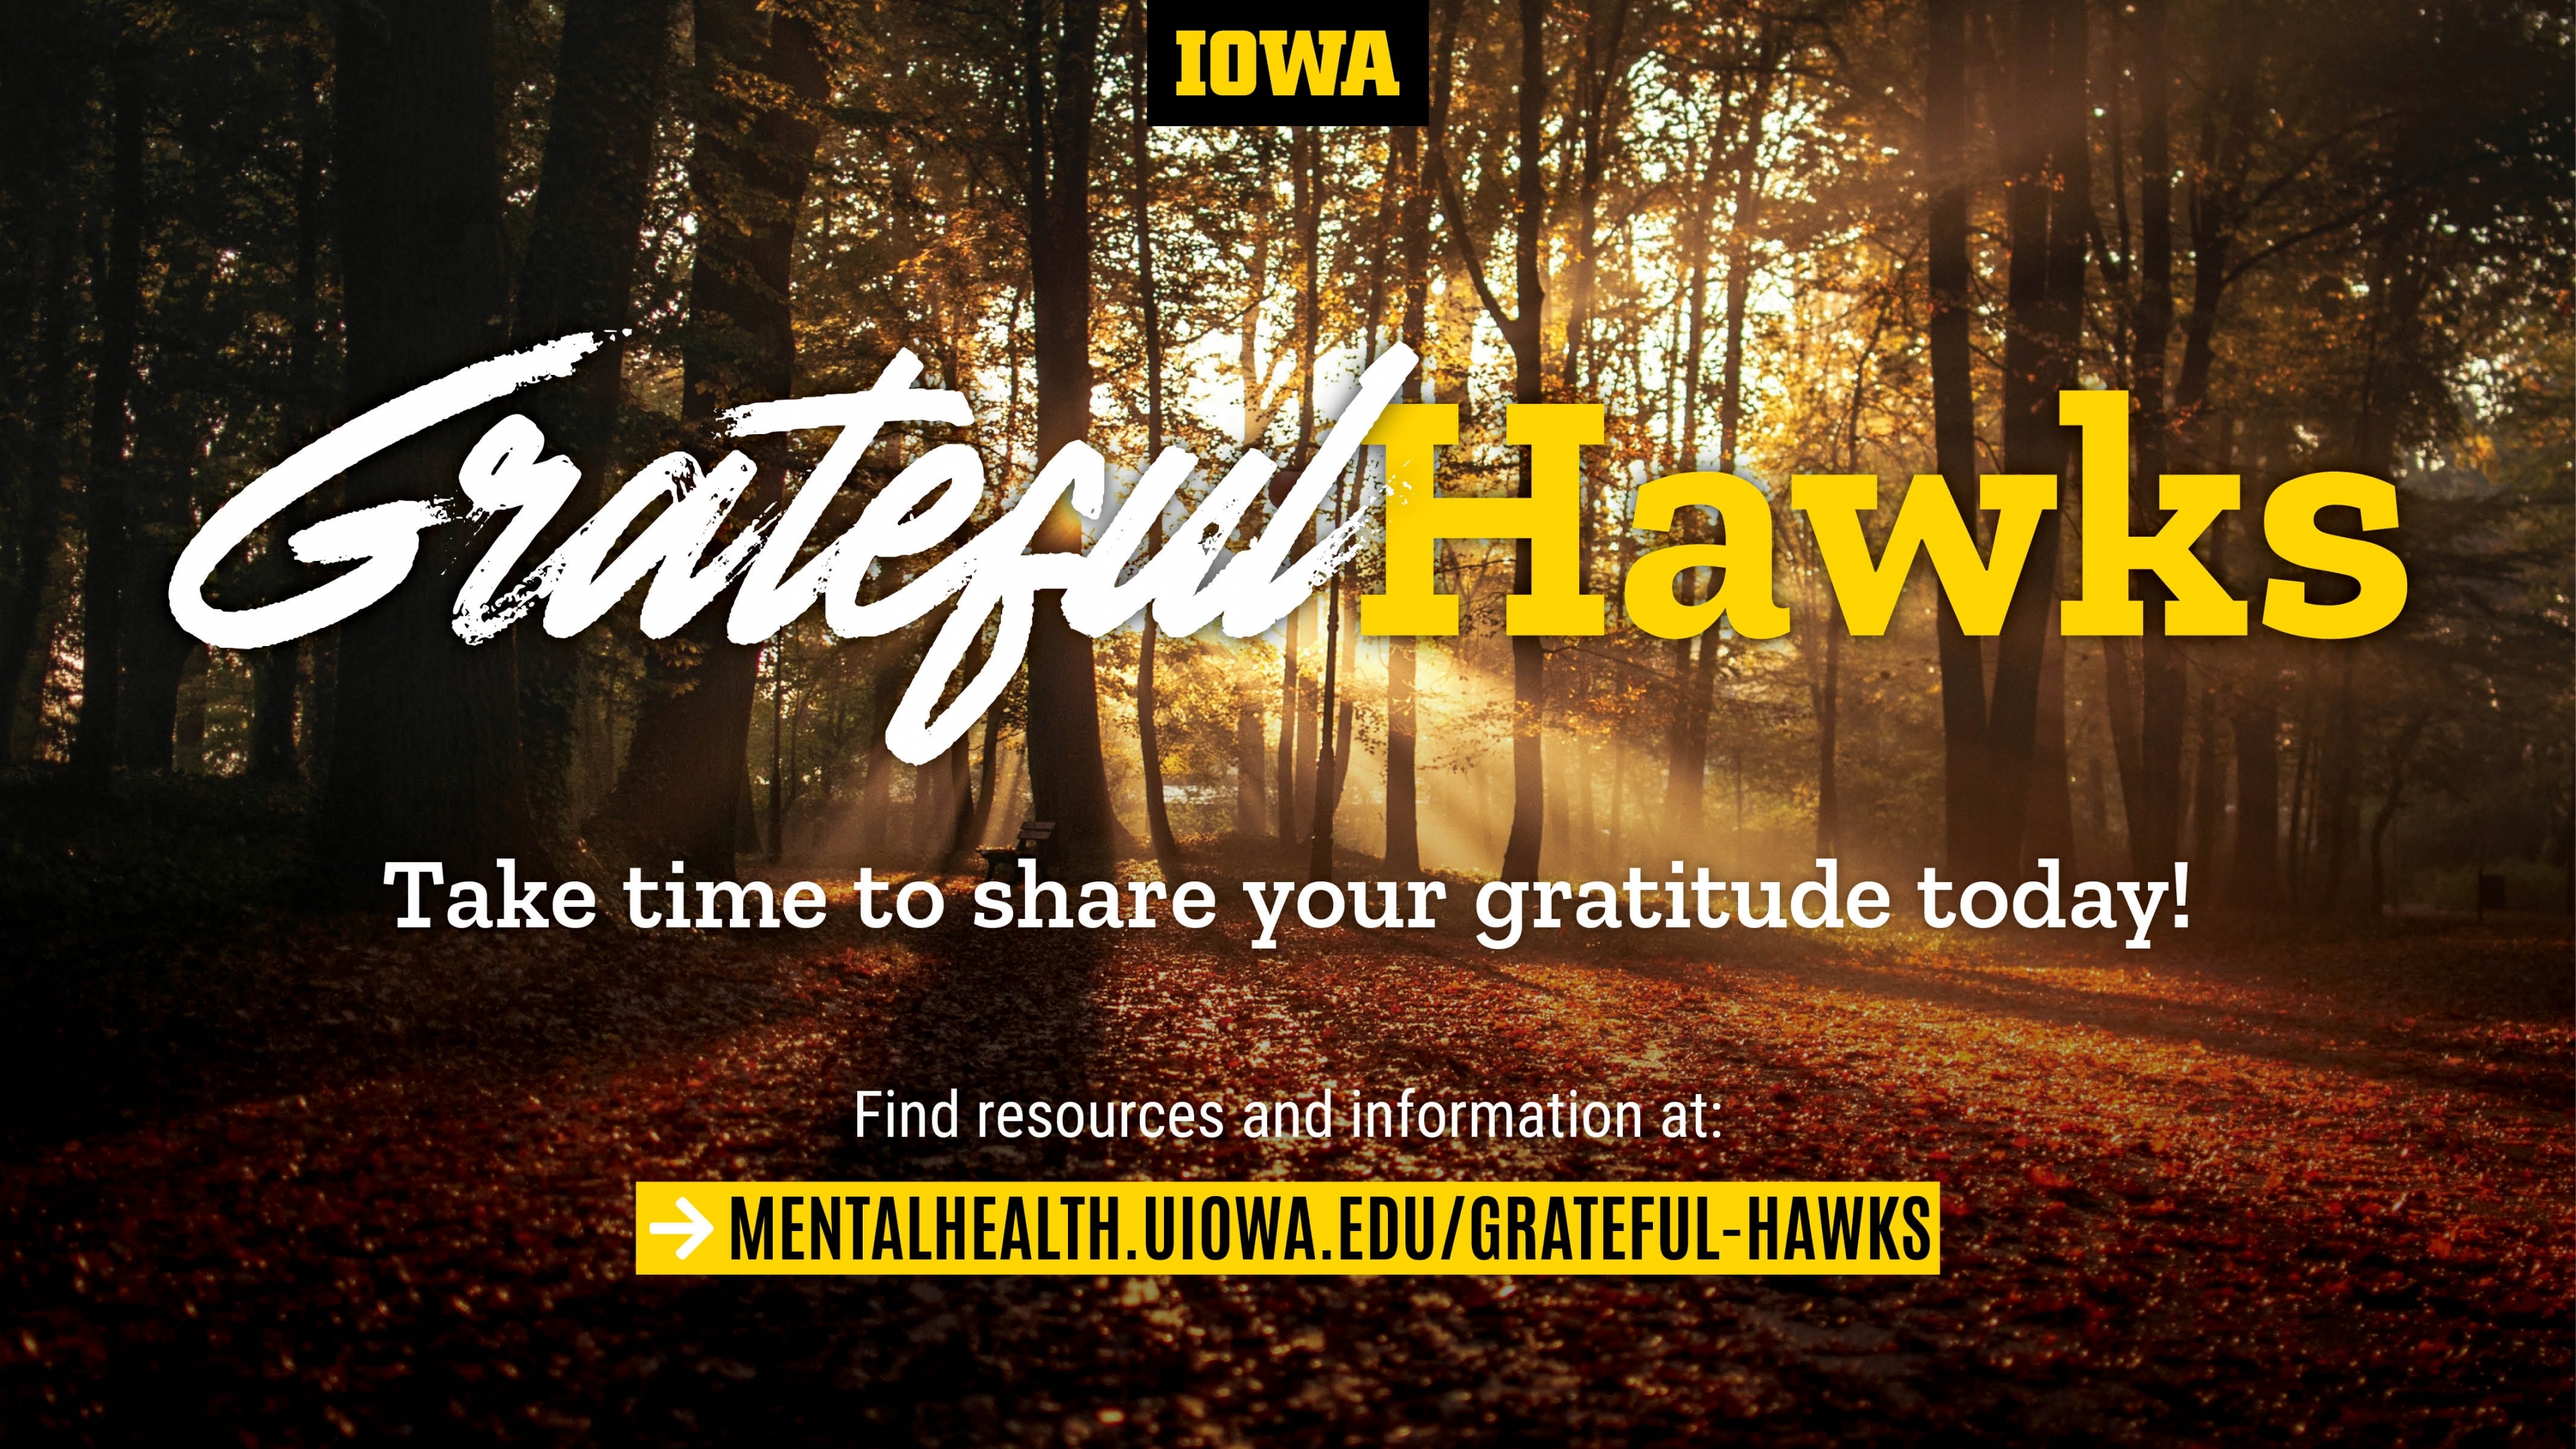 Grateful Hawks. Take time to share your gratitude today! Find resources and information at: mentalhealth.uiowa.edu/grateful-hawks